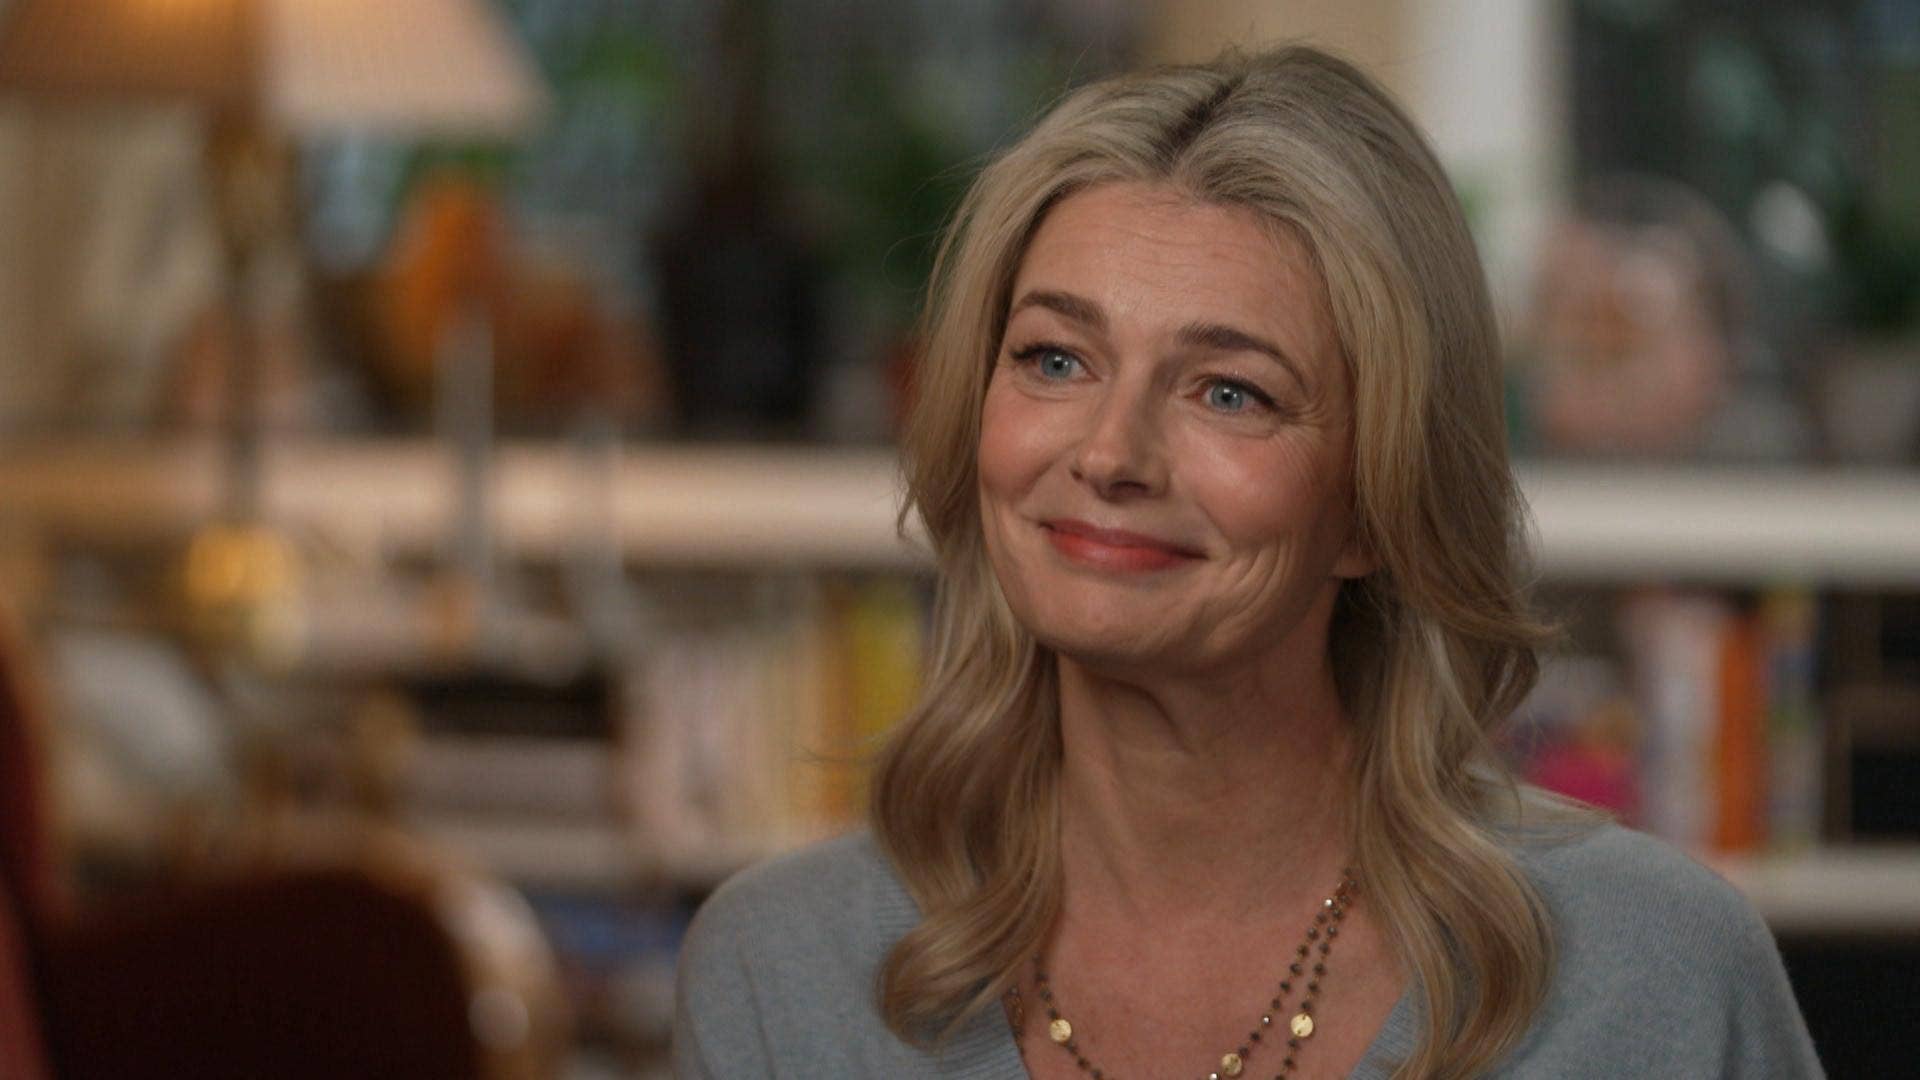 Paulina Porizkova reveals what she 'actually' looks like in the morning: 'Not bad for 55'